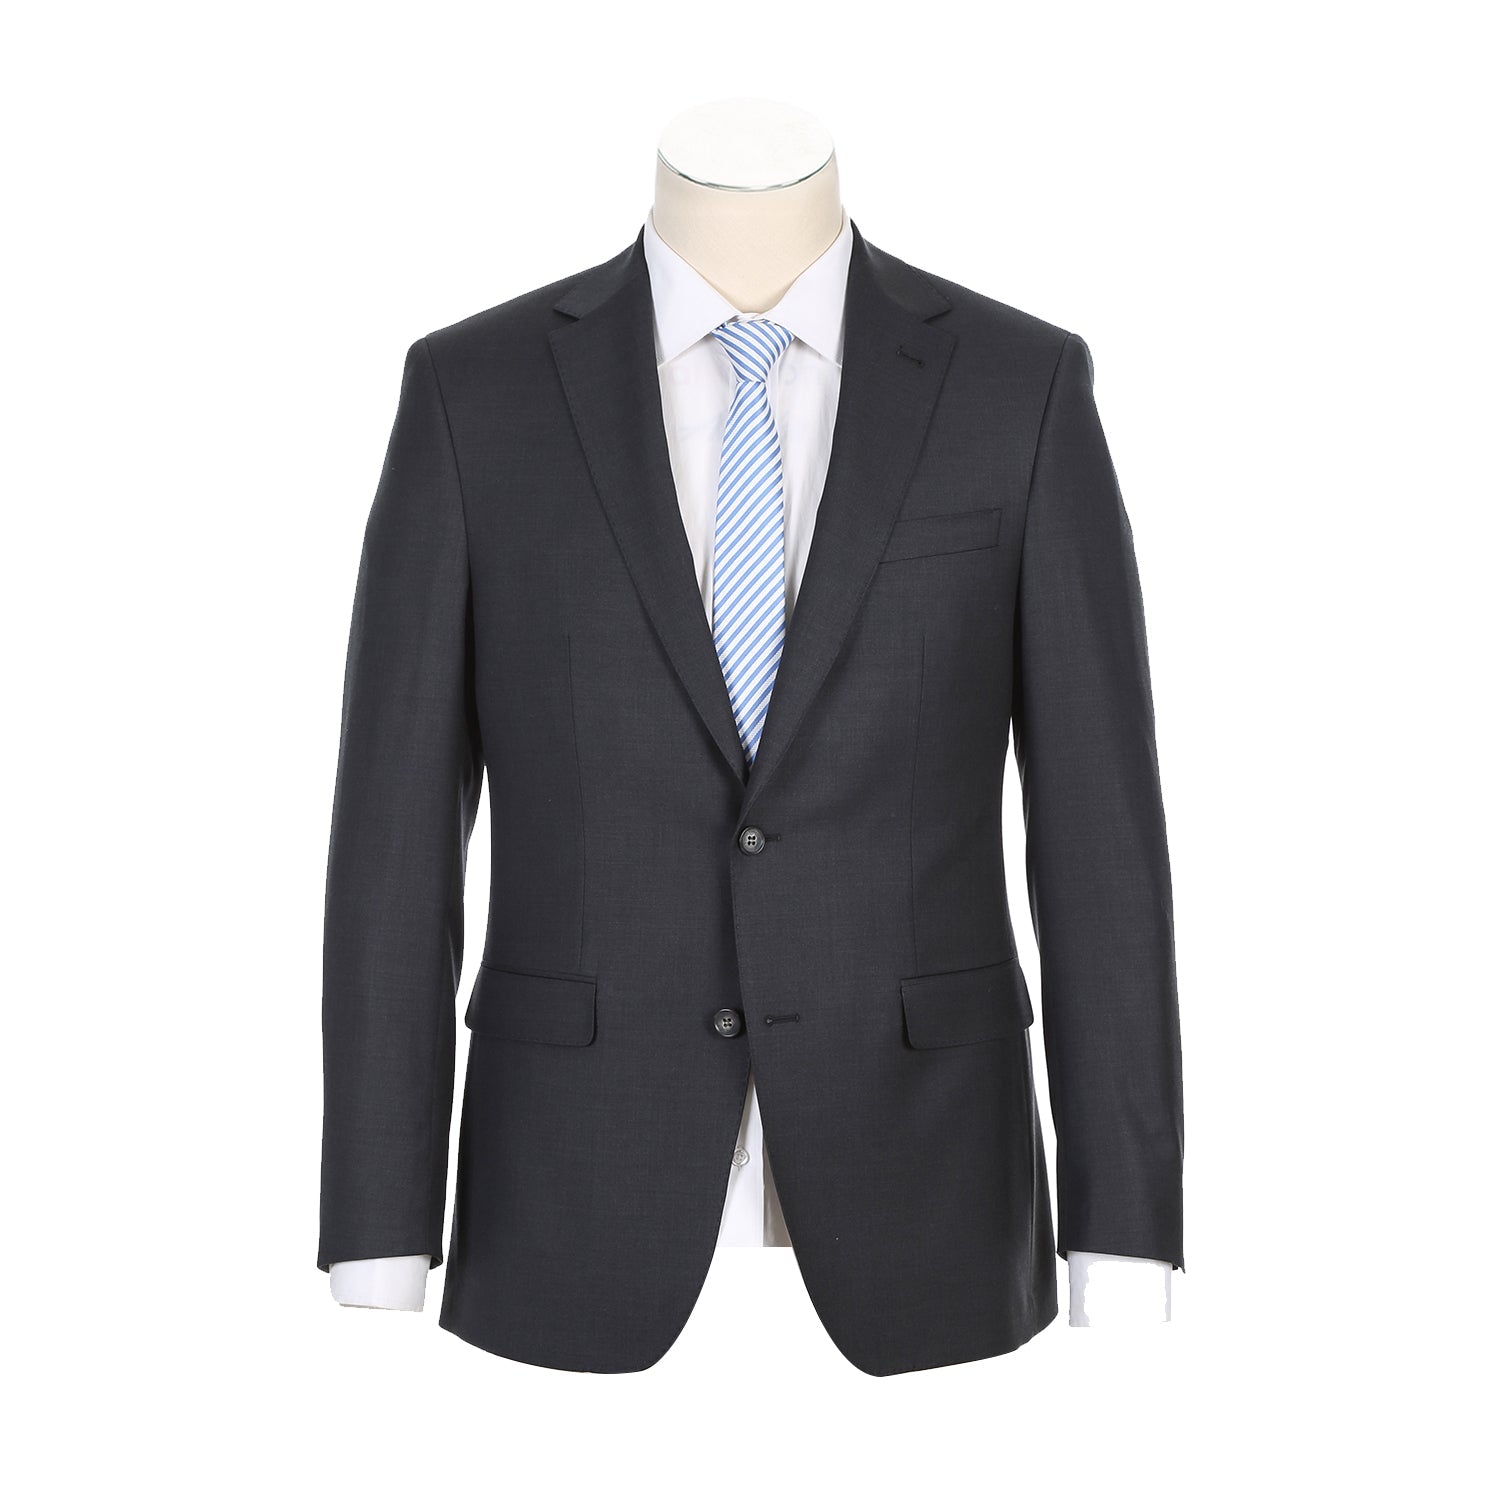 Super 150s Wool 2-Button Half-Canvas CLASSIC FIT Suit in Charcoal (Short, Regular, and Long Available) by Rivelino